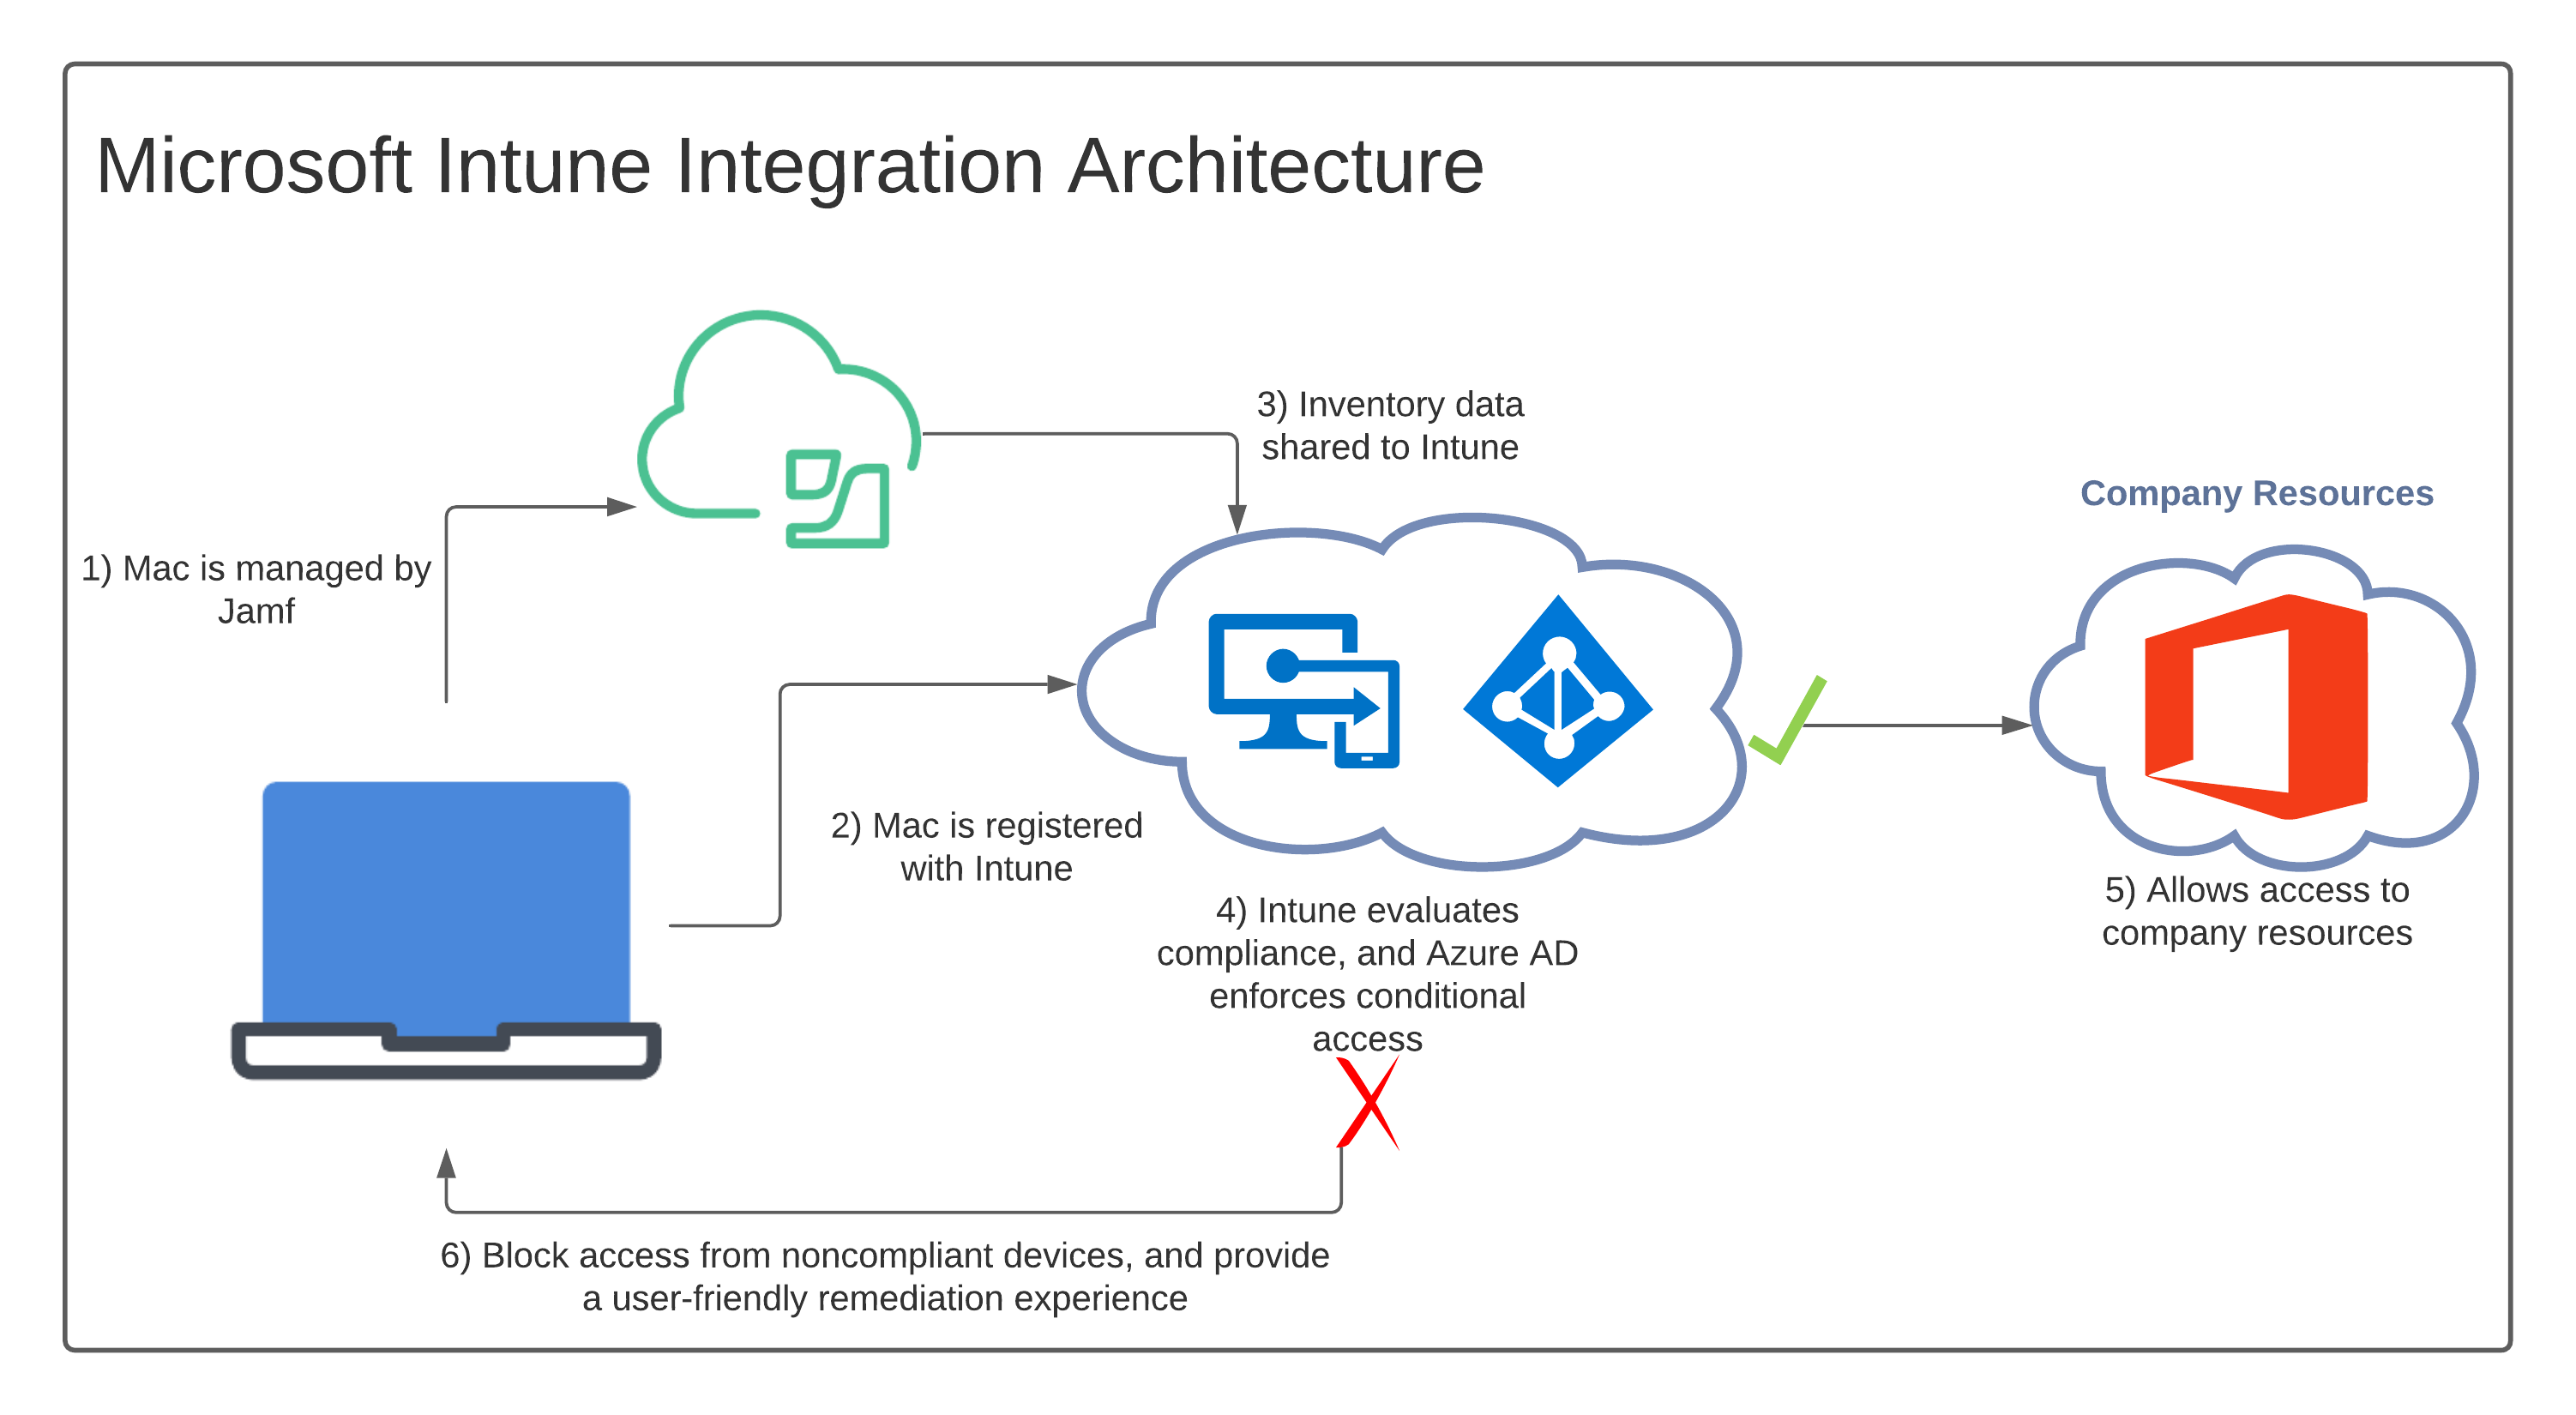 images/download/attachments/85400259/Microsoft_Intune_Integration.png